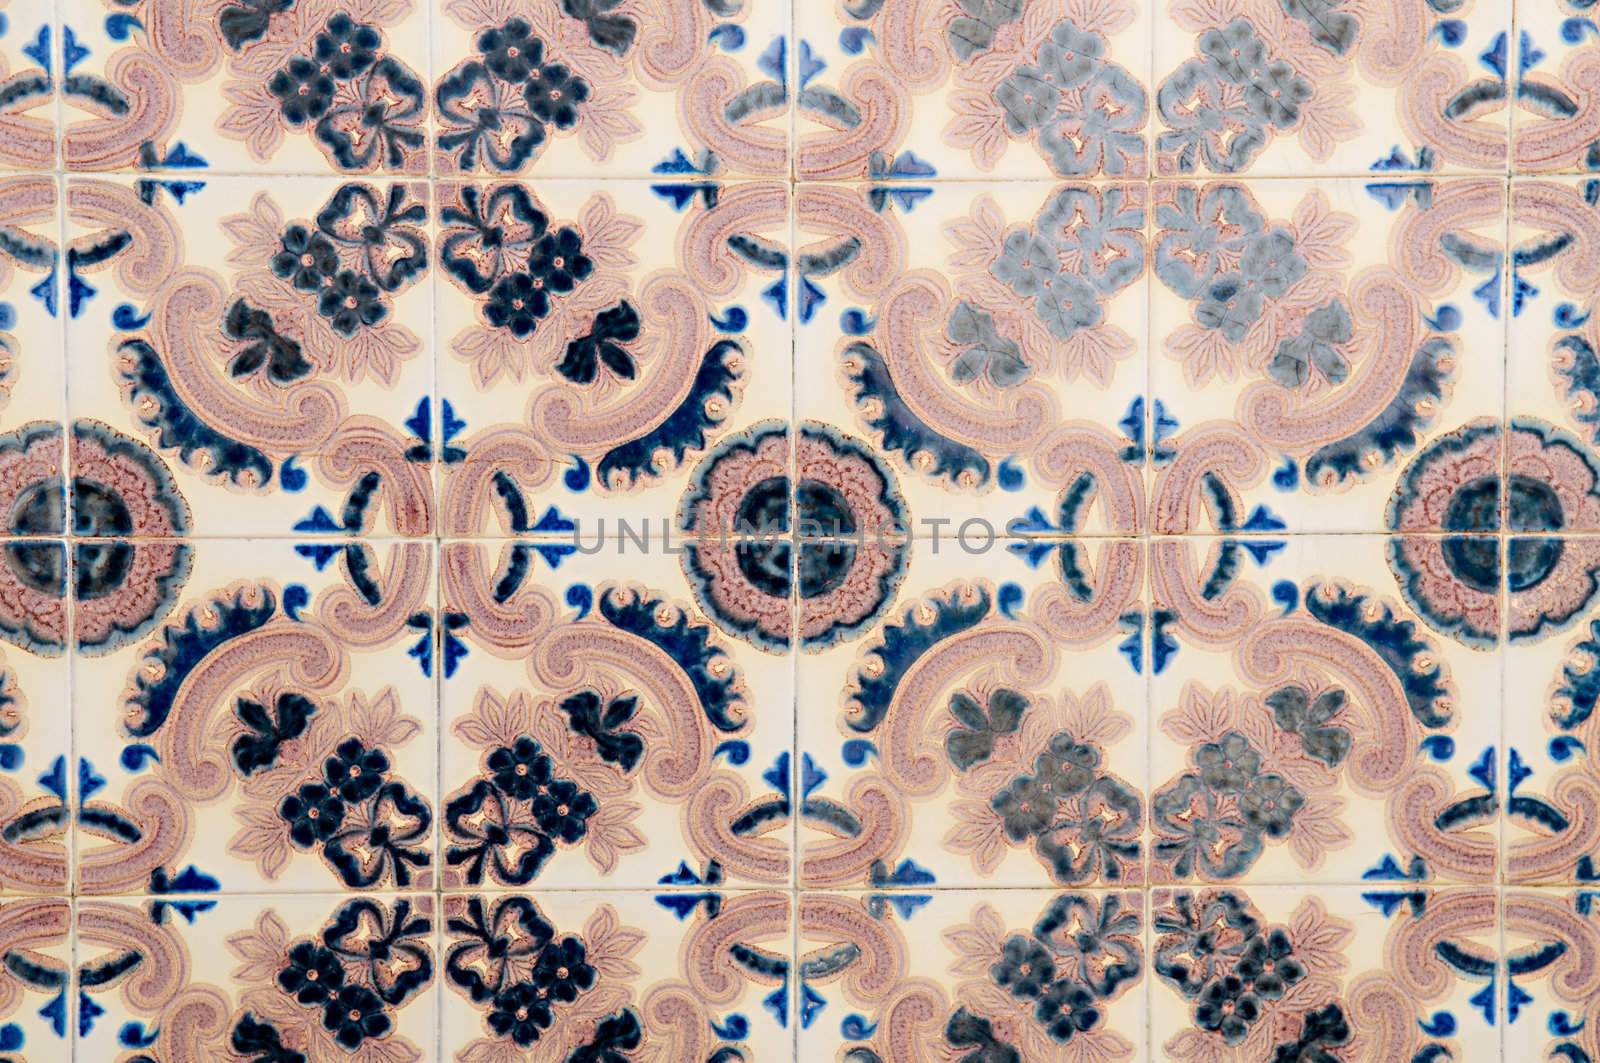 The abstract pattern of Portuguese painted tiles with interesting designs